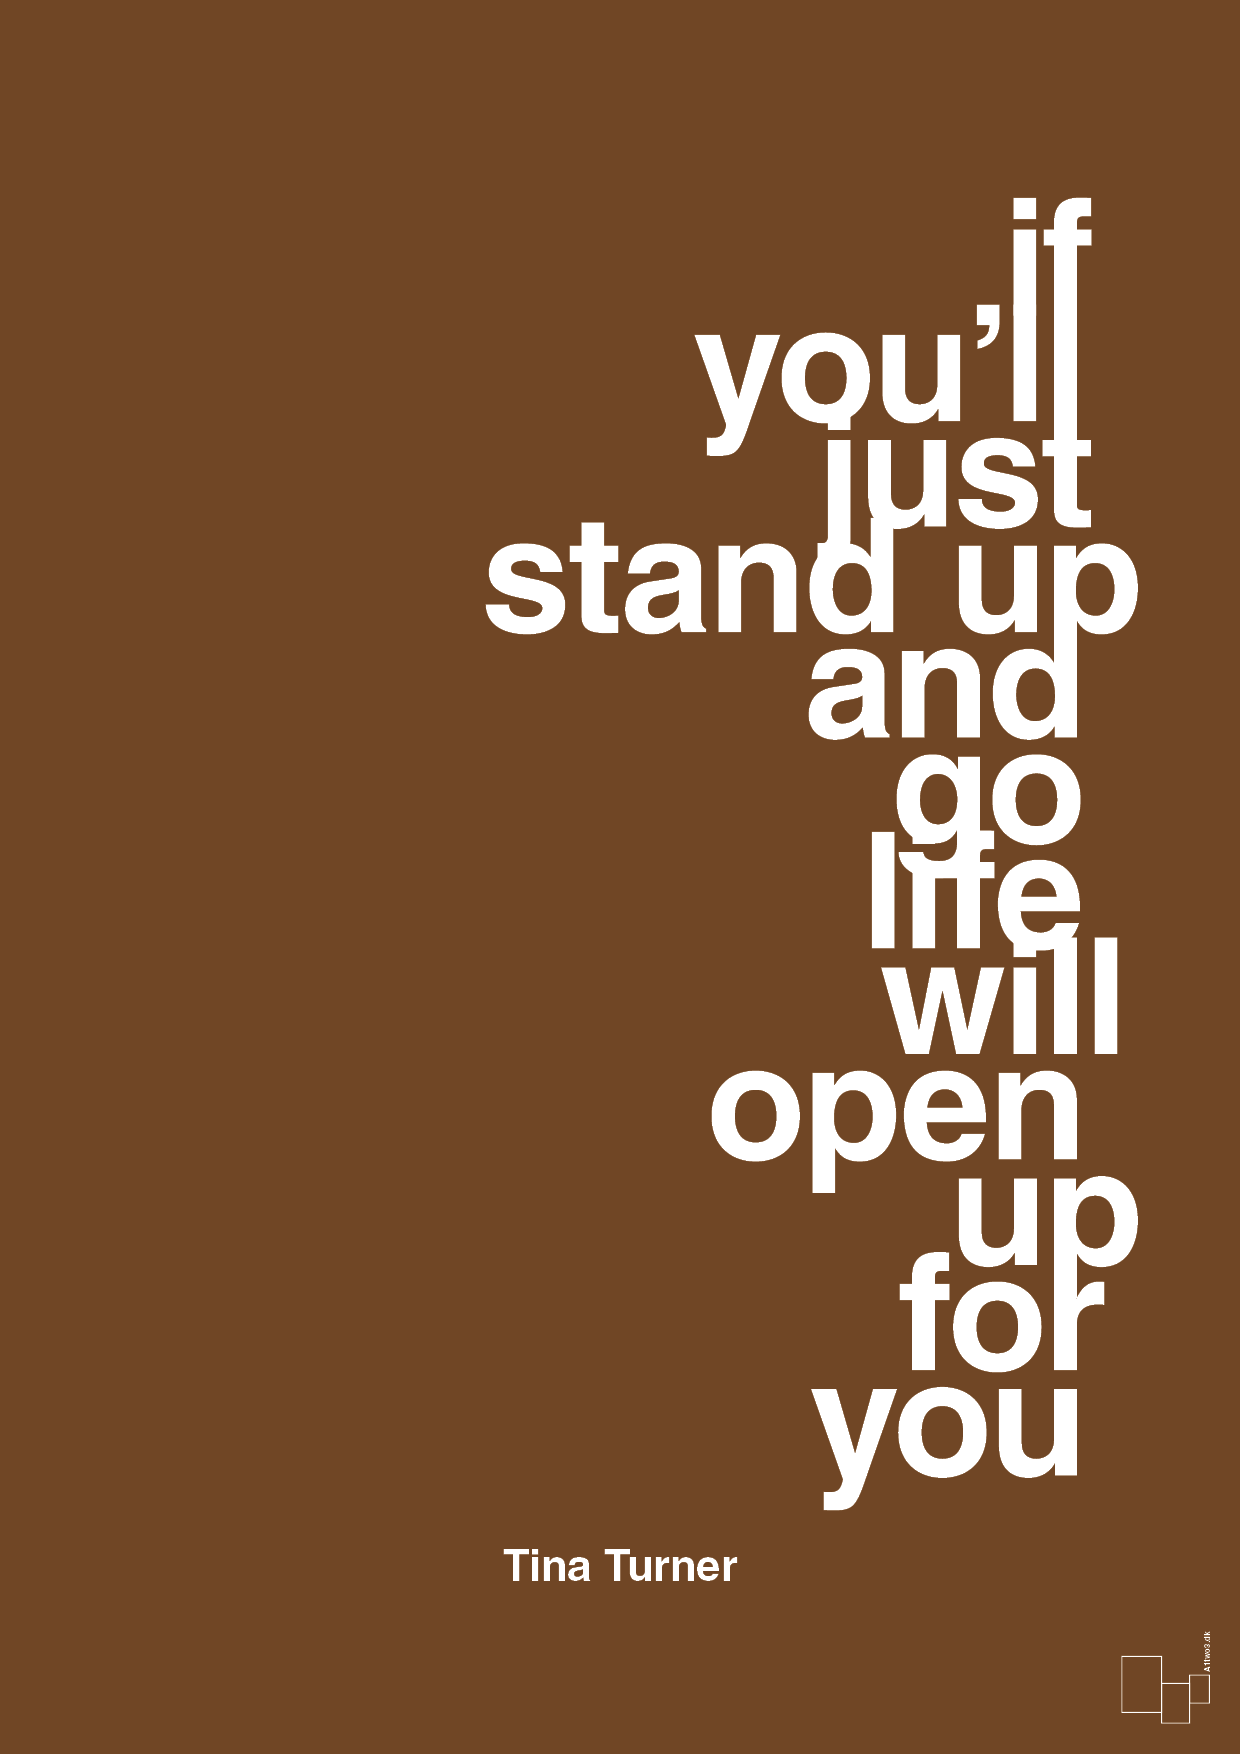 if you’ll just stand up and go life will open up for you - Plakat med Citater i Dark Brown